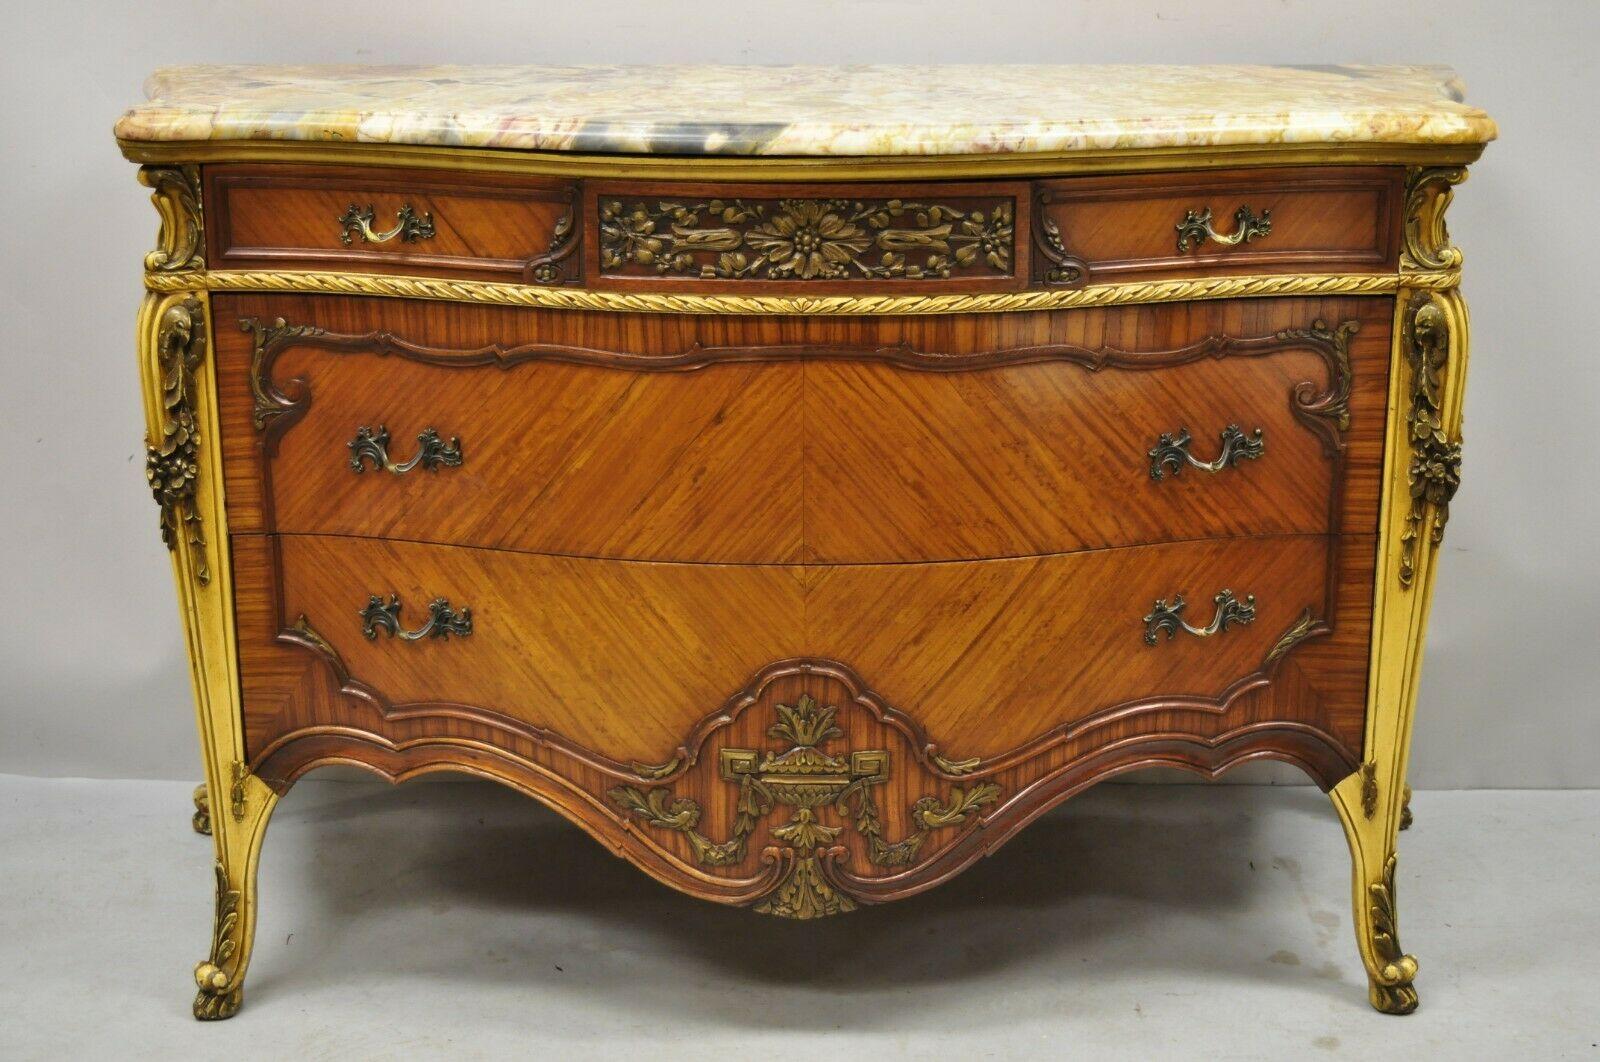 Antique French Louis XV rogue marble top satinwood commode dresser. Item features a French rogue marble shaped top, serpentine front, beautiful wood grain, nicely carved details, 3 dovetailed drawers, cabriole legs, very nice antique item, quality